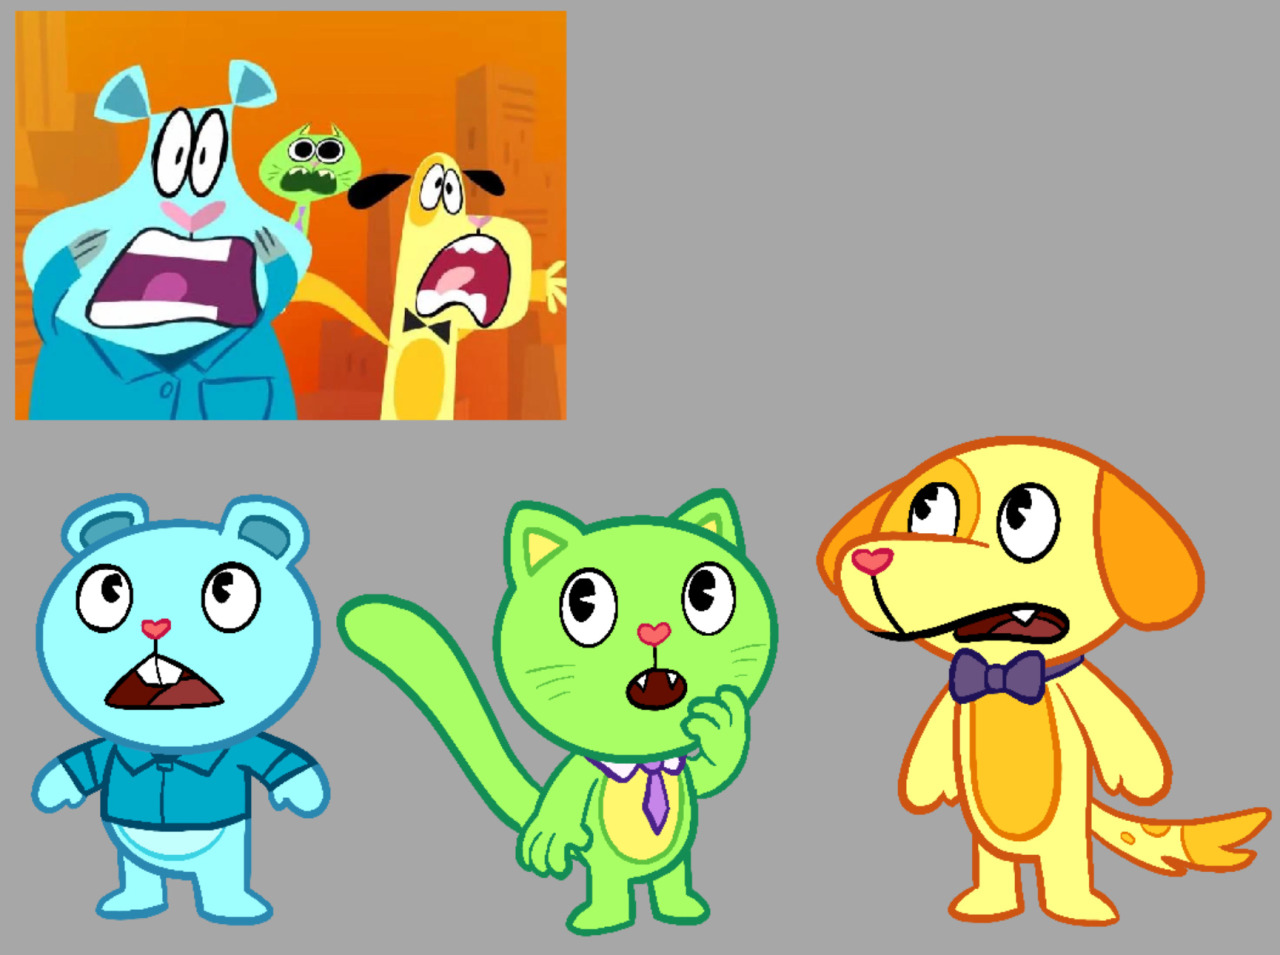 The bear, cat, and dog characters from the HTF kapow episode "Mirror Mirror" in the classic HTF style.